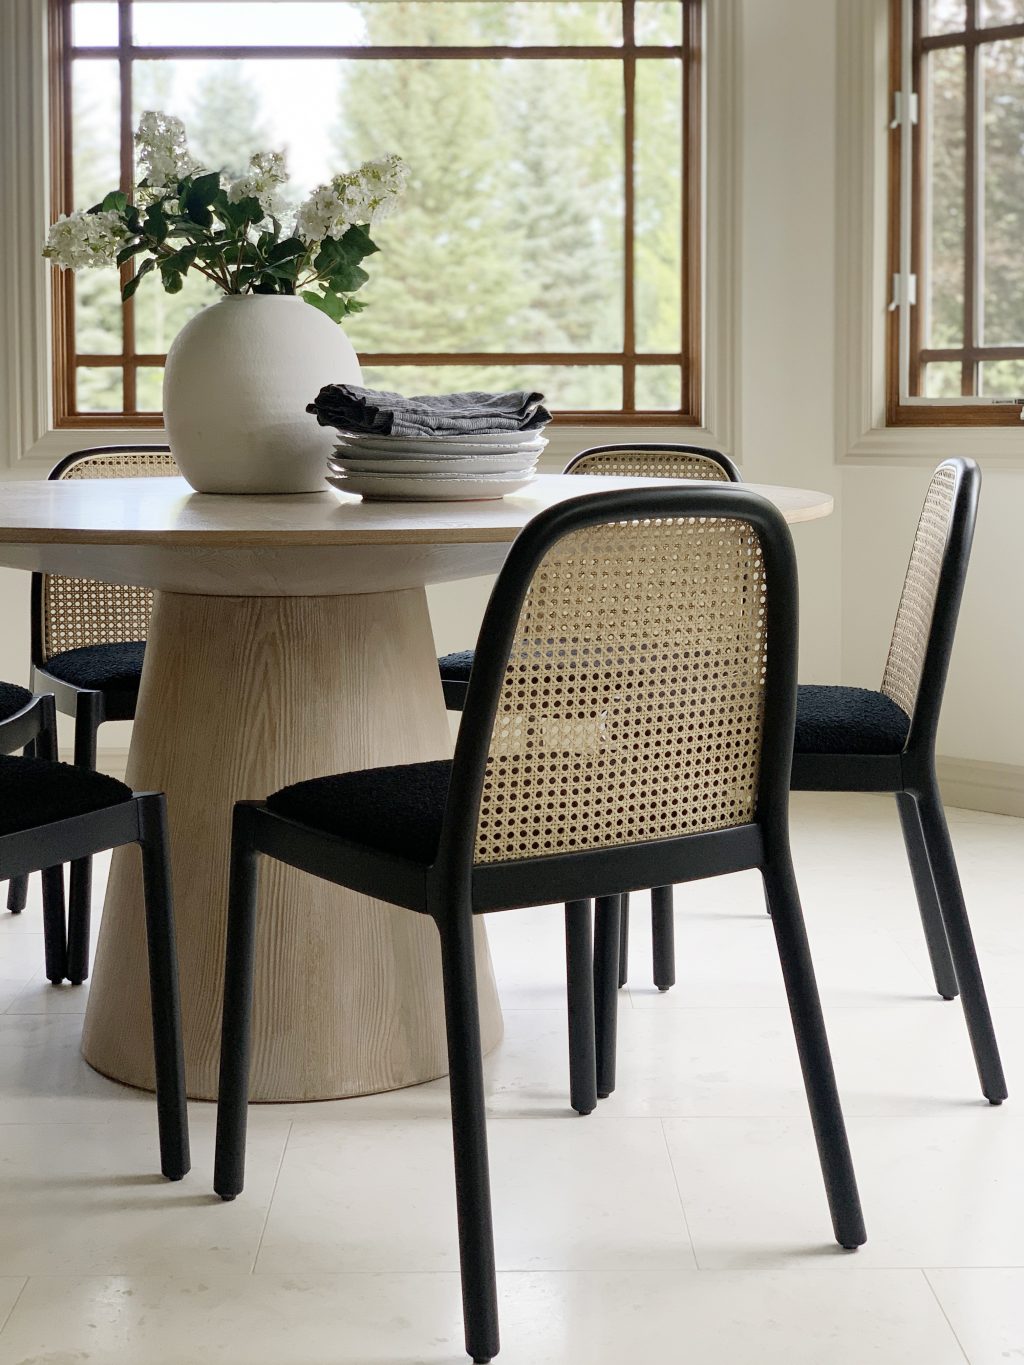 Our New Caned Dining Chairs Are Here, Spray Painting Dining Room Chairs Black